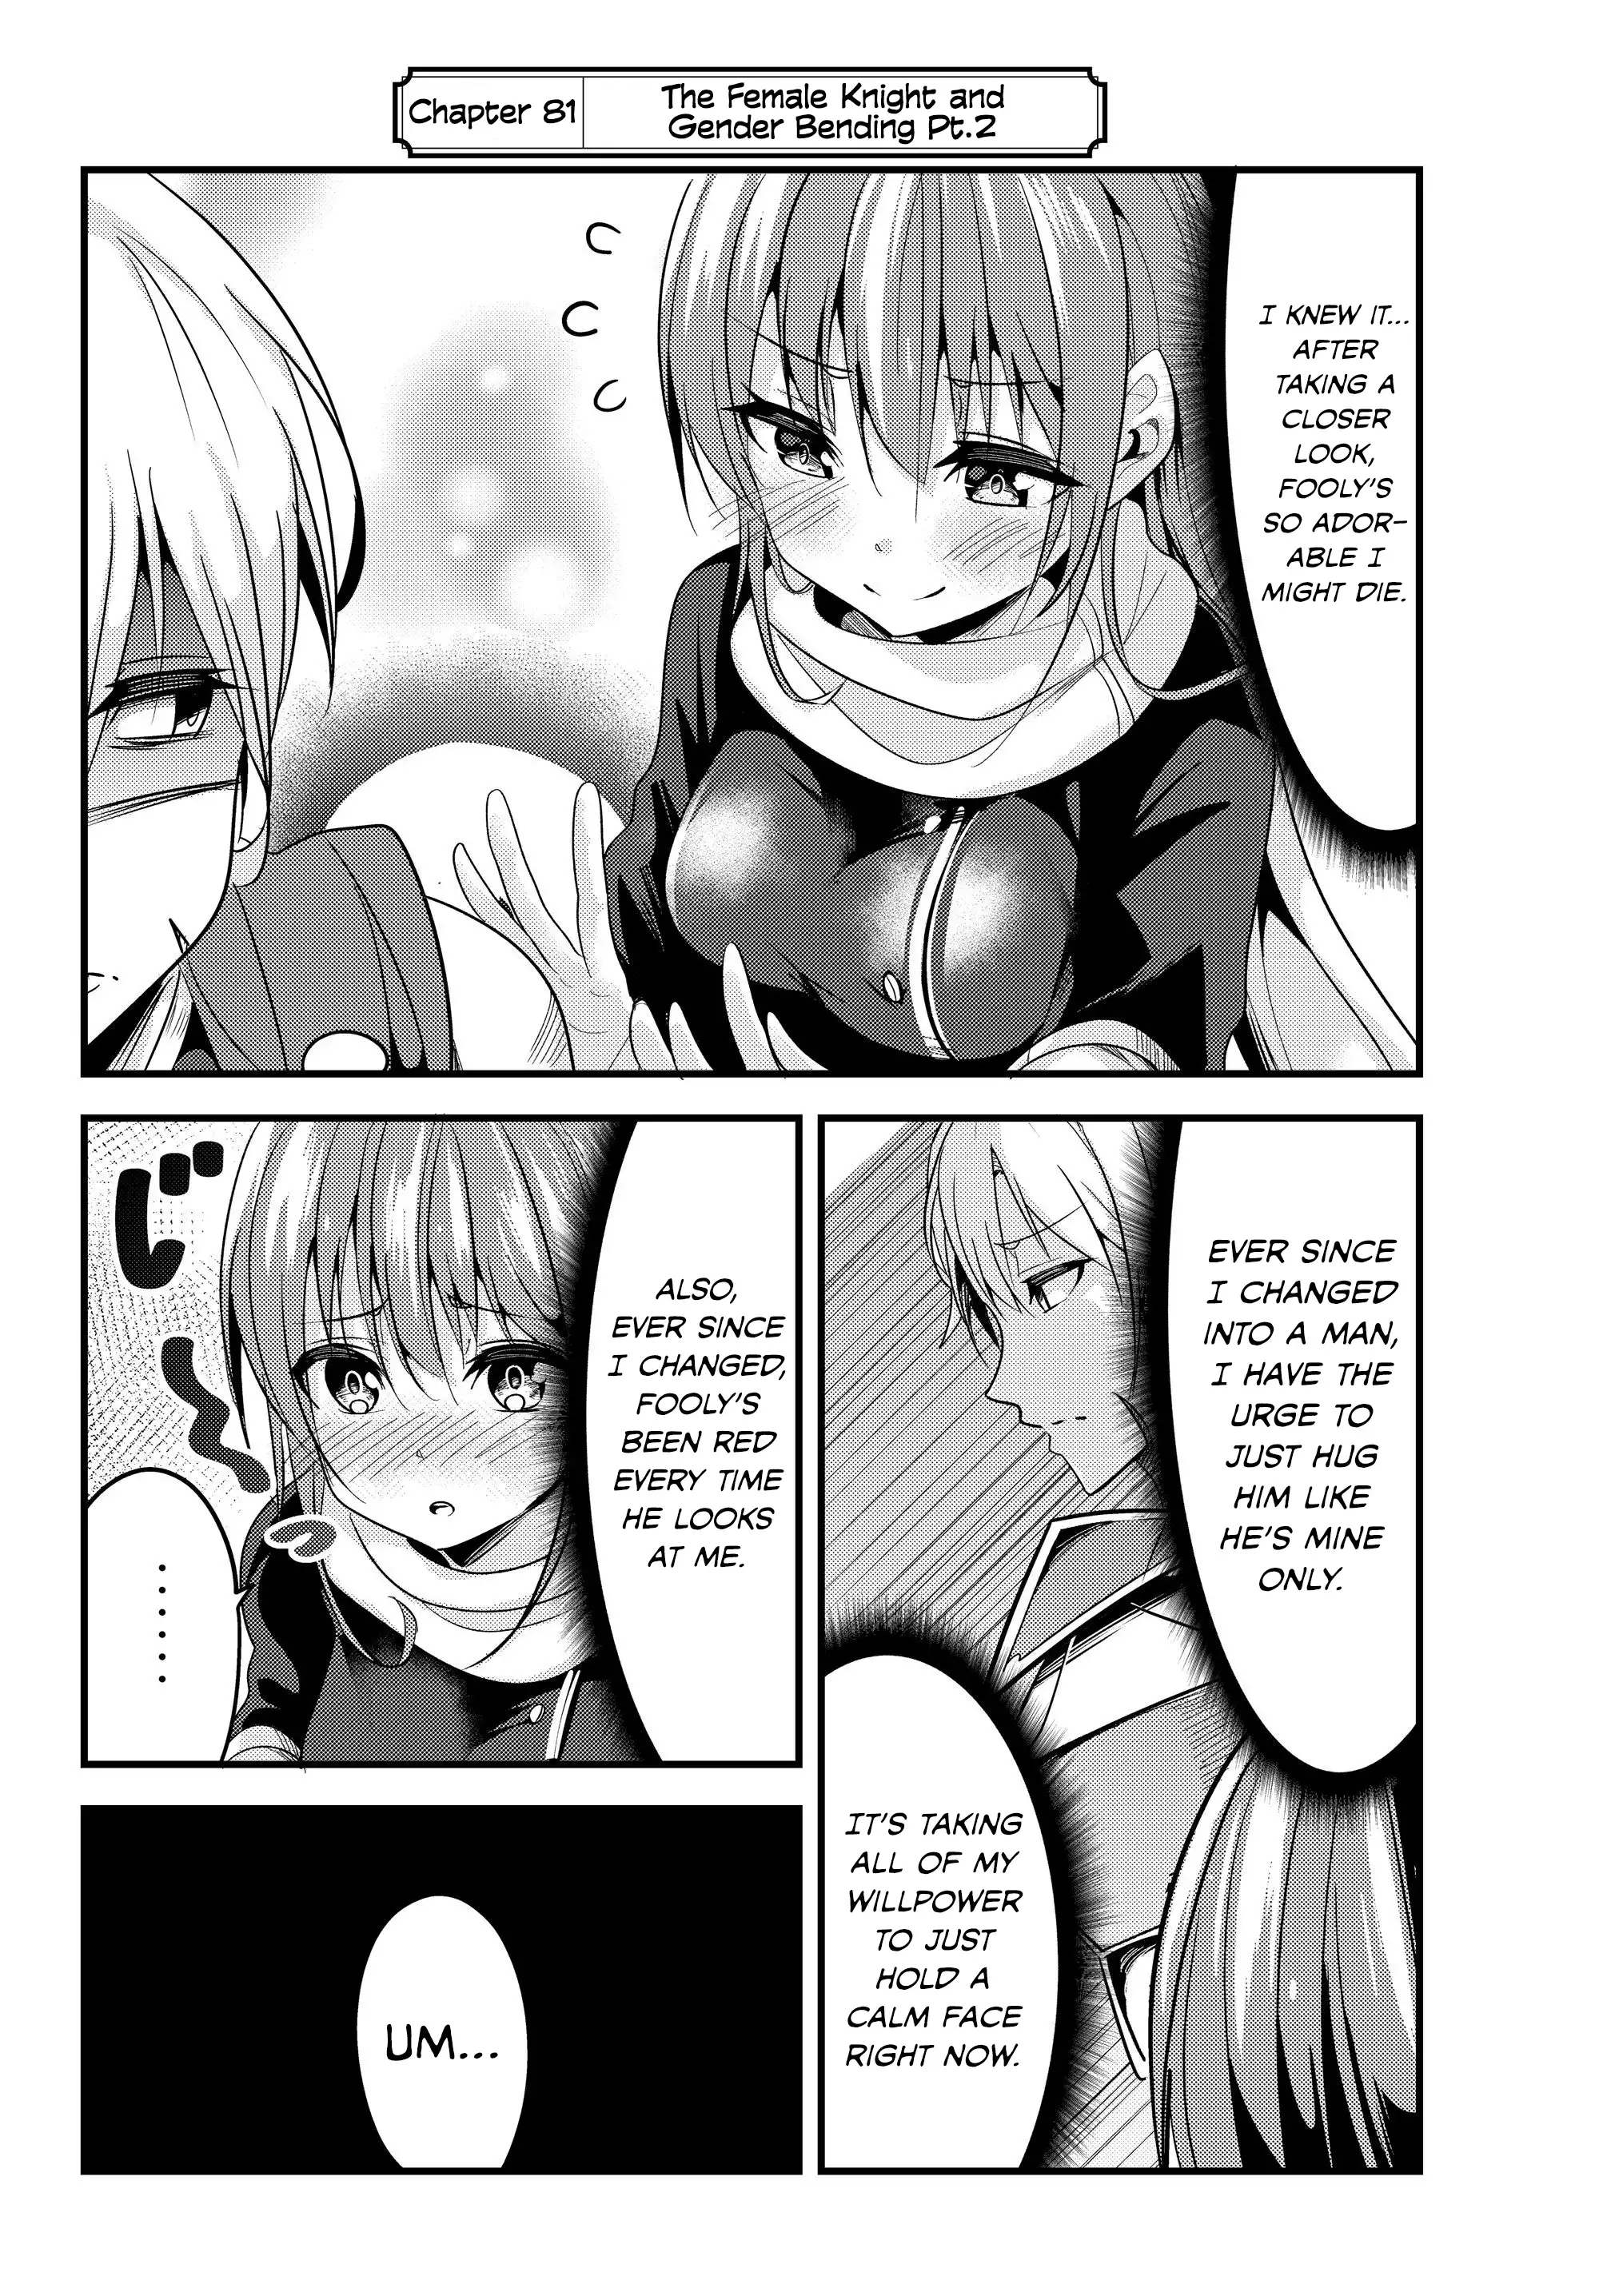 A Story About Treating a Female Knight, Who Has Never Been Treated as a Woman, as a Woman - Chapter 81 Page 2